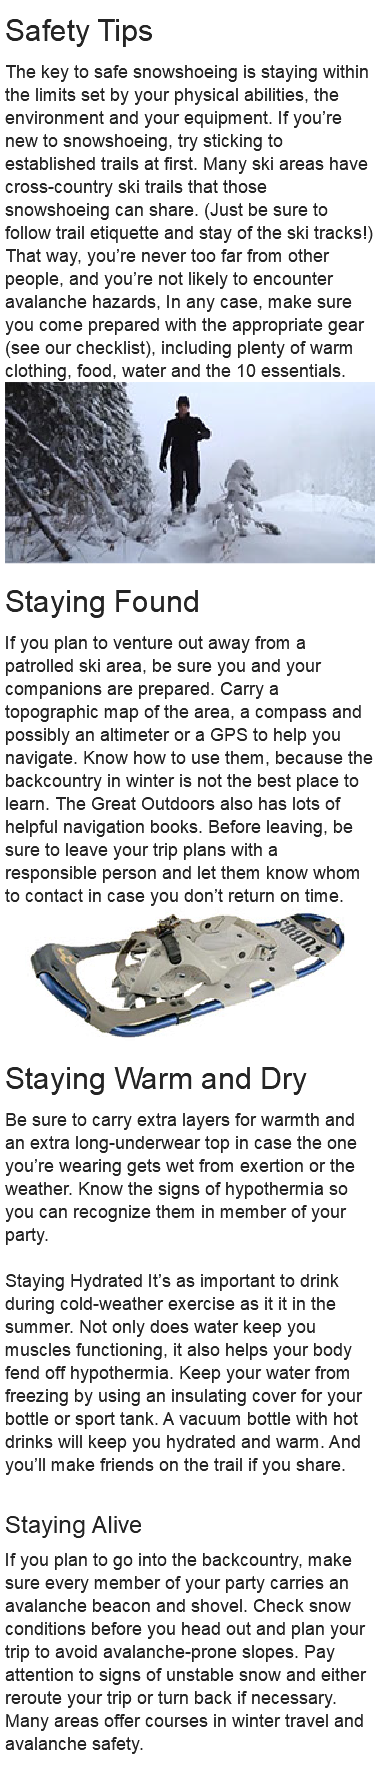 Safety Tips The key to safe snowshoeing is staying within the limits set by your physical abilities, the environment and your equipment. If you’re new to snowshoeing, try sticking to established trails at first. Many ski areas have cross-country ski trails that those snowshoeing can share. (Just be sure to follow trail etiquette and stay of the ski tracks!) That way, you’re never too far from other people, and you’re not likely to encounter avalanche hazards, In any case, make sure you come prepared with the appropriate gear (see our checklist), including plenty of warm clothing, food, water and the 10 essentials. ﷯ Staying Found If you plan to venture out away from a patrolled ski area, be sure you and your companions are prepared. Carry a topographic map of the area, a compass and possibly an altimeter or a GPS to help you navigate. Know how to use them, because the backcountry in winter is not the best place to learn. The Great Outdoors also has lots of helpful navigation books. Before leaving, be sure to leave your trip plans with a responsible person and let them know whom to contact in case you don’t return on time. ﷯ Staying Warm and Dry Be sure to carry extra layers for warmth and an extra long-underwear top in case the one you’re wearing gets wet from exertion or the weather. Know the signs of hypothermia so you can recognize them in member of your party. Staying Hydrated It’s as important to drink during cold-weather exercise as it it in the summer. Not only does water keep you muscles functioning, it also helps your body fend off hypothermia. Keep your water from freezing by using an insulating cover for your bottle or sport tank. A vacuum bottle with hot drinks will keep you hydrated and warm. And you’ll make friends on the trail if you share. Staying Alive If you plan to go into the backcountry, make sure every member of your party carries an avalanche beacon and shovel. Check snow conditions before you head out and plan your trip to avoid avalanche-prone slopes. Pay attention to signs of unstable snow and either reroute your trip or turn back if necessary. Many areas offer courses in winter travel and avalanche safety. 